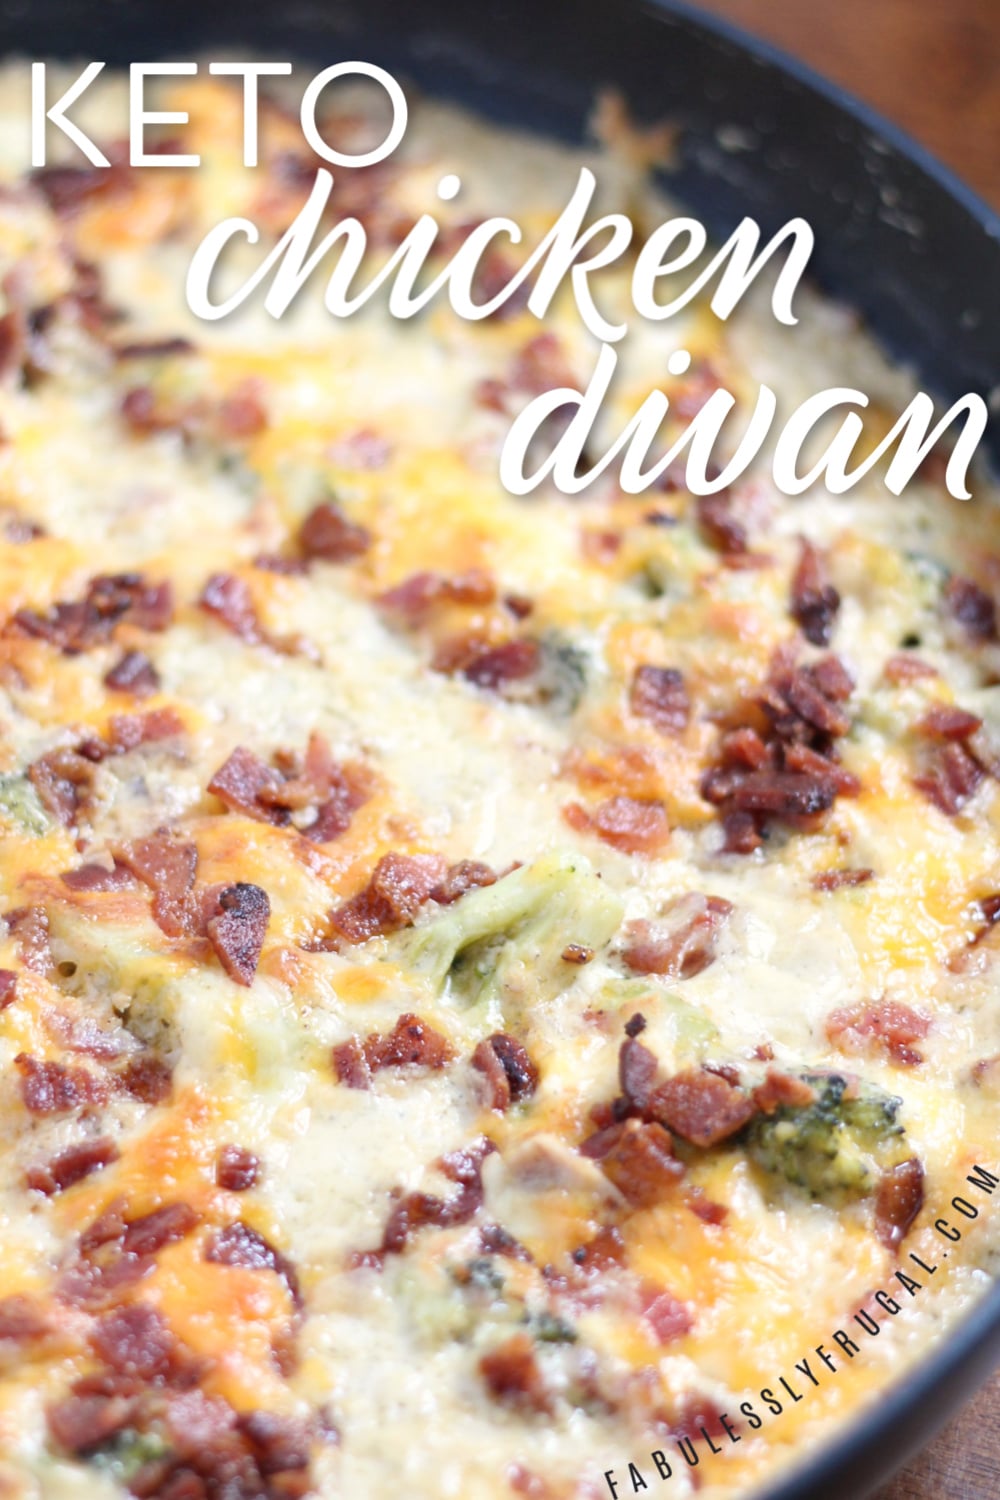 Keto recipes with chicken, bacon and ranch